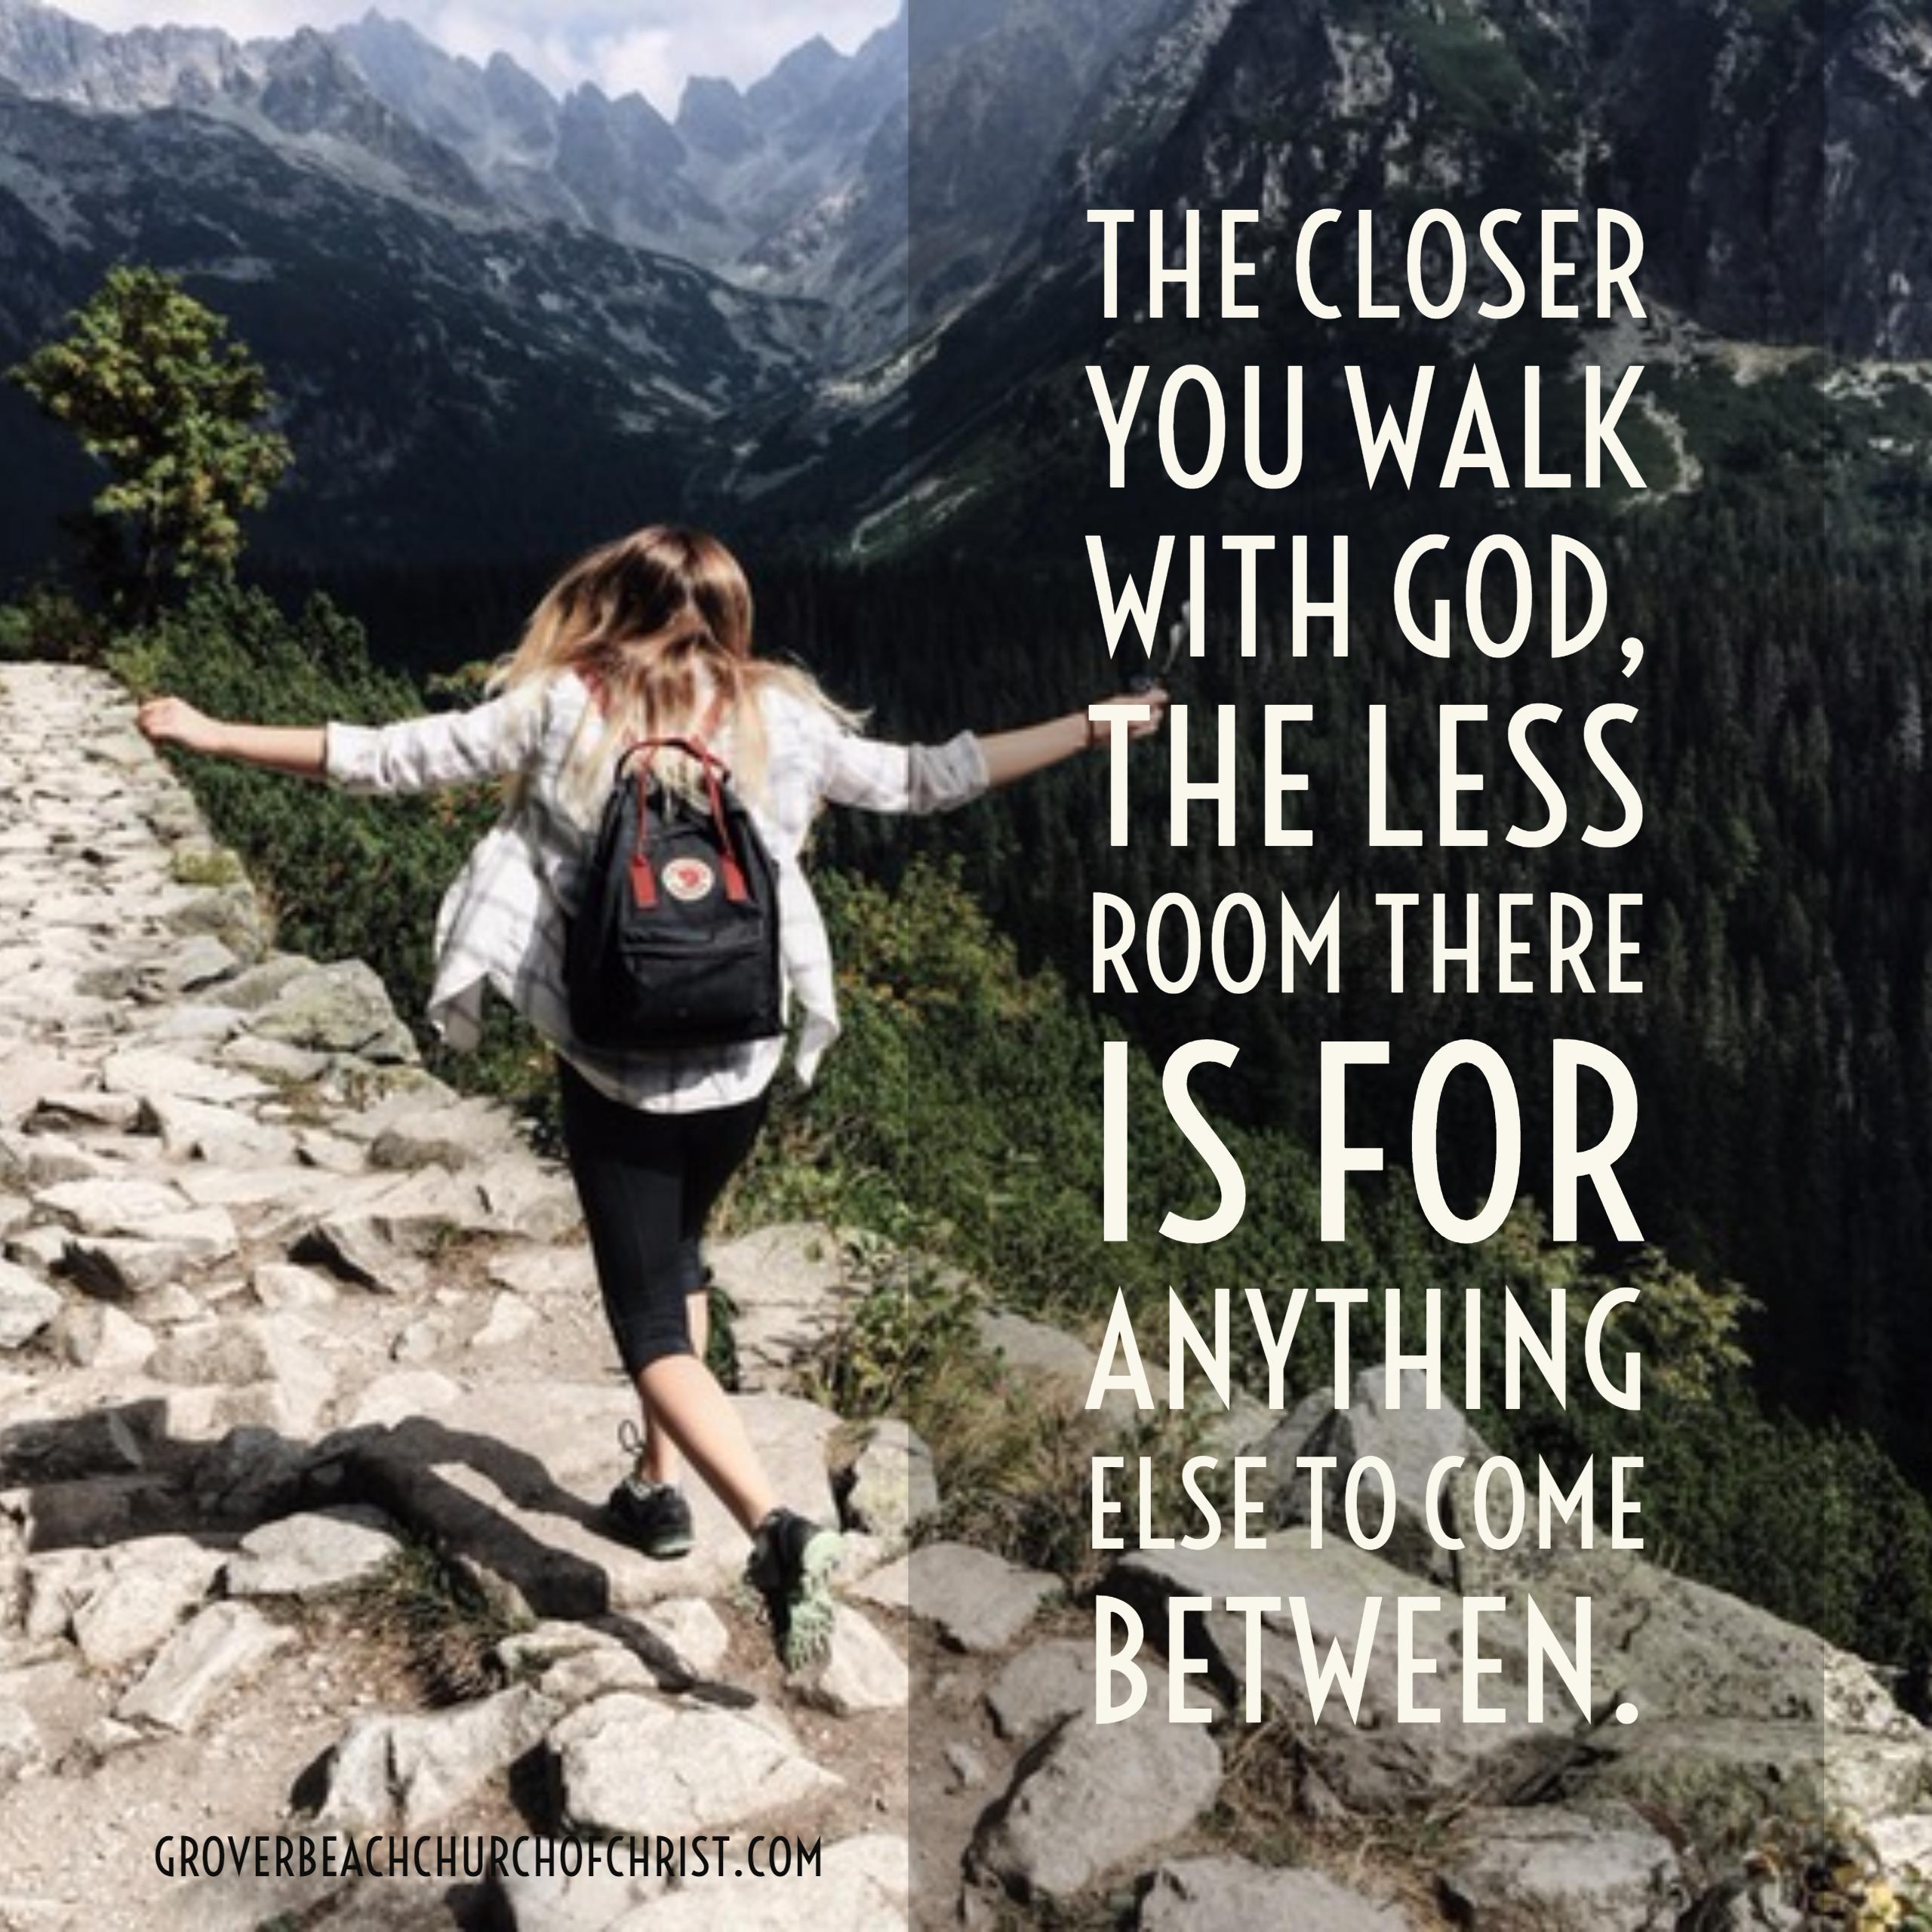 The closer you walk with God